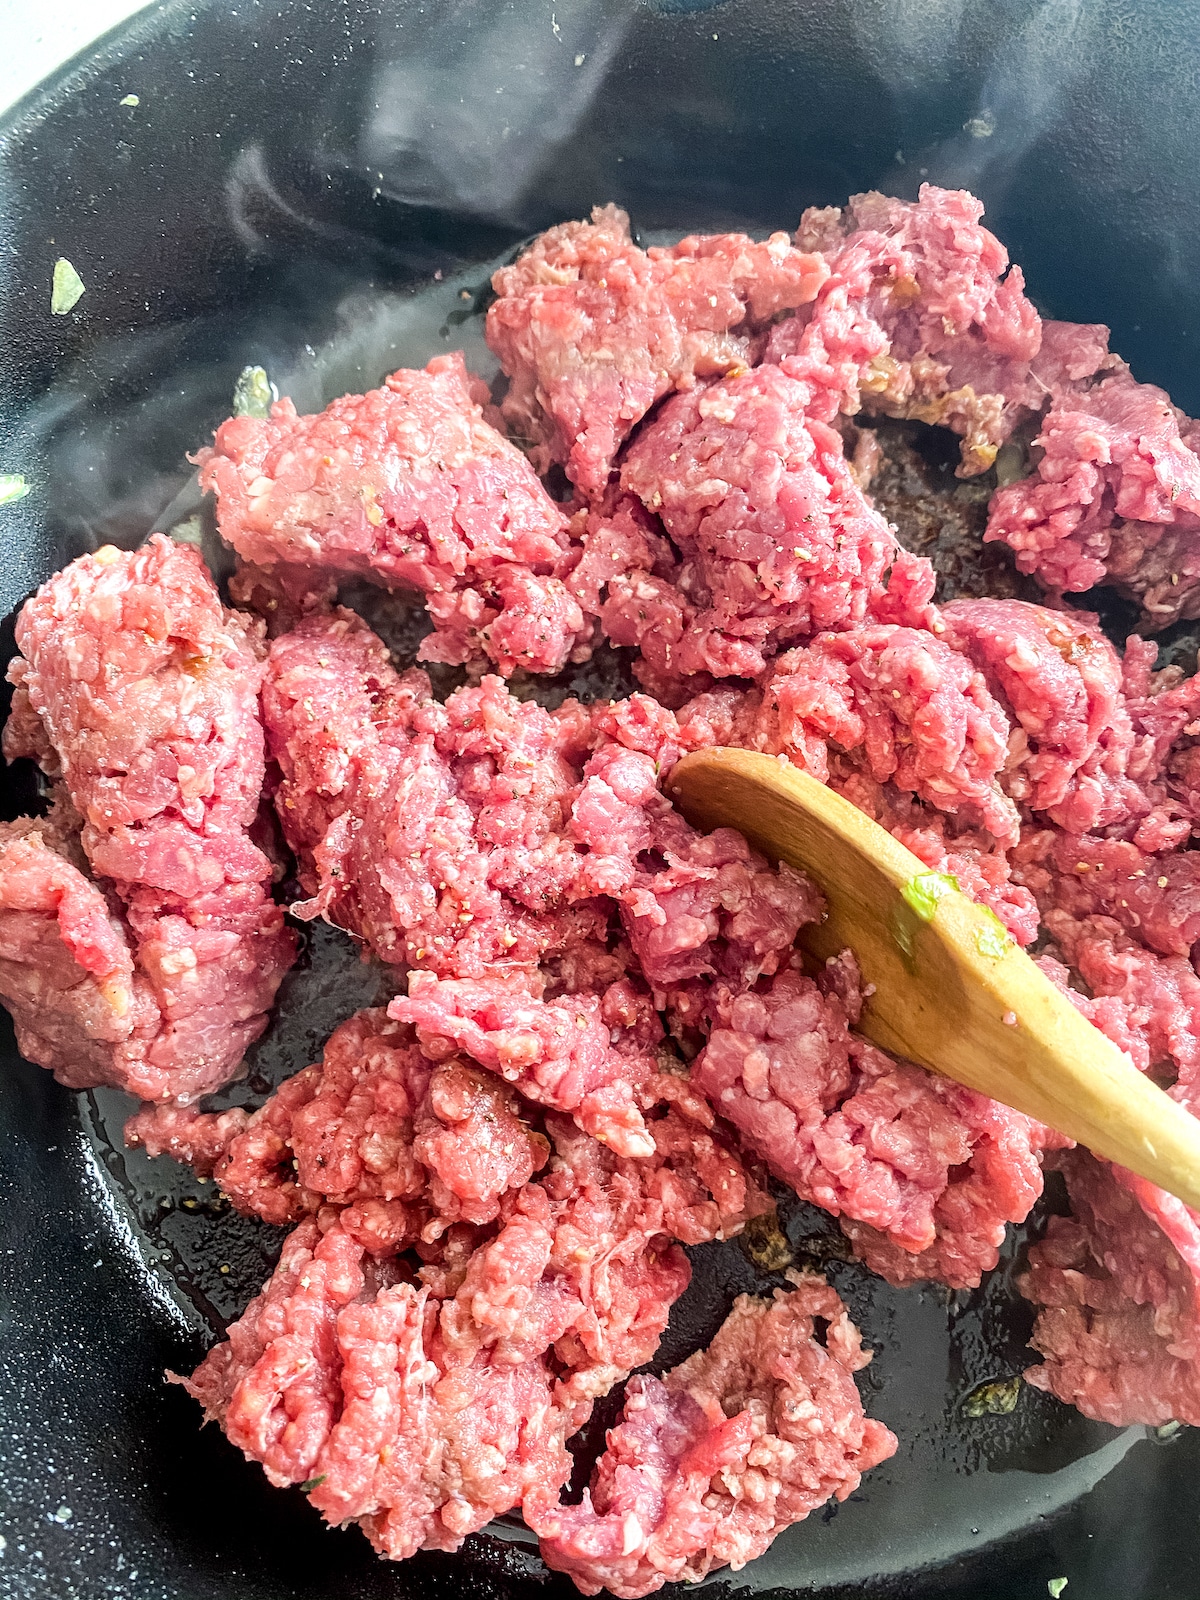 Cooking ground meat